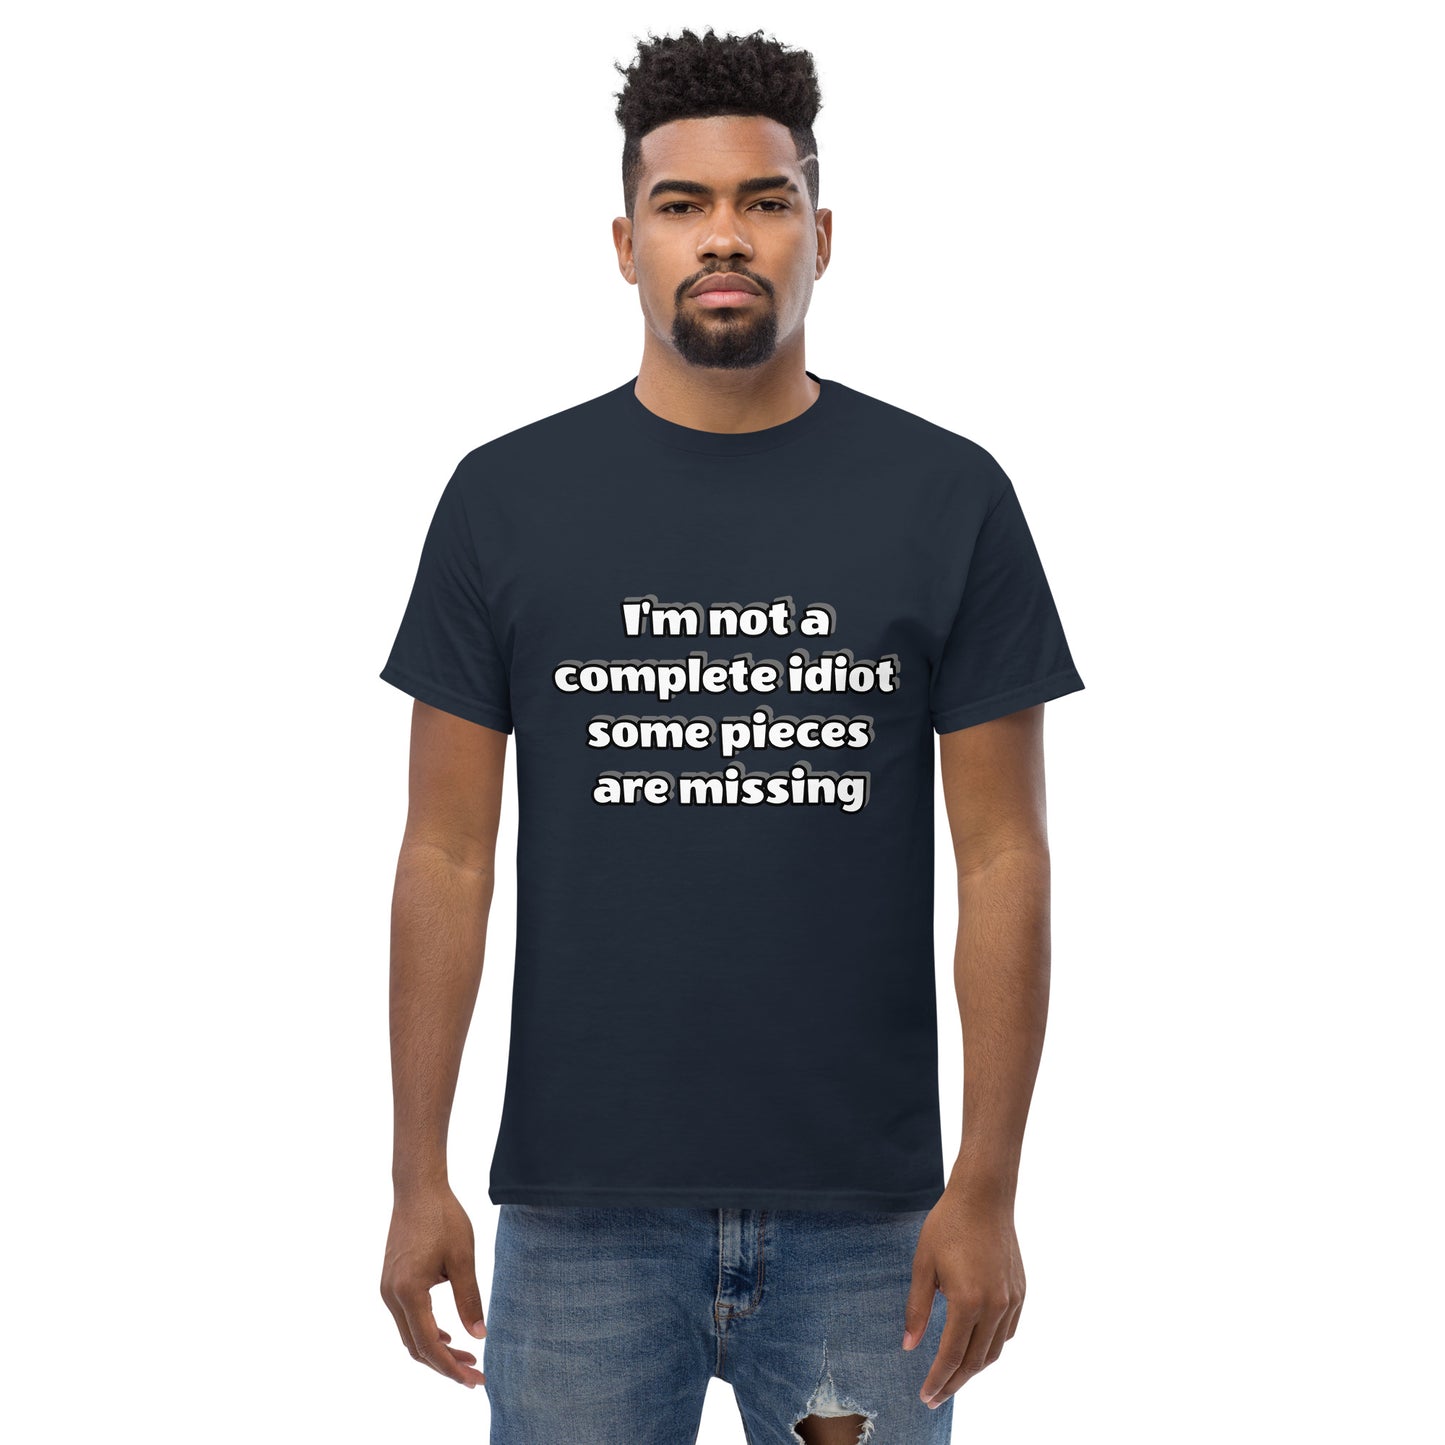 Men with navy blue t-shirt with text “I’m not a complete idiot, some pieces are missing”